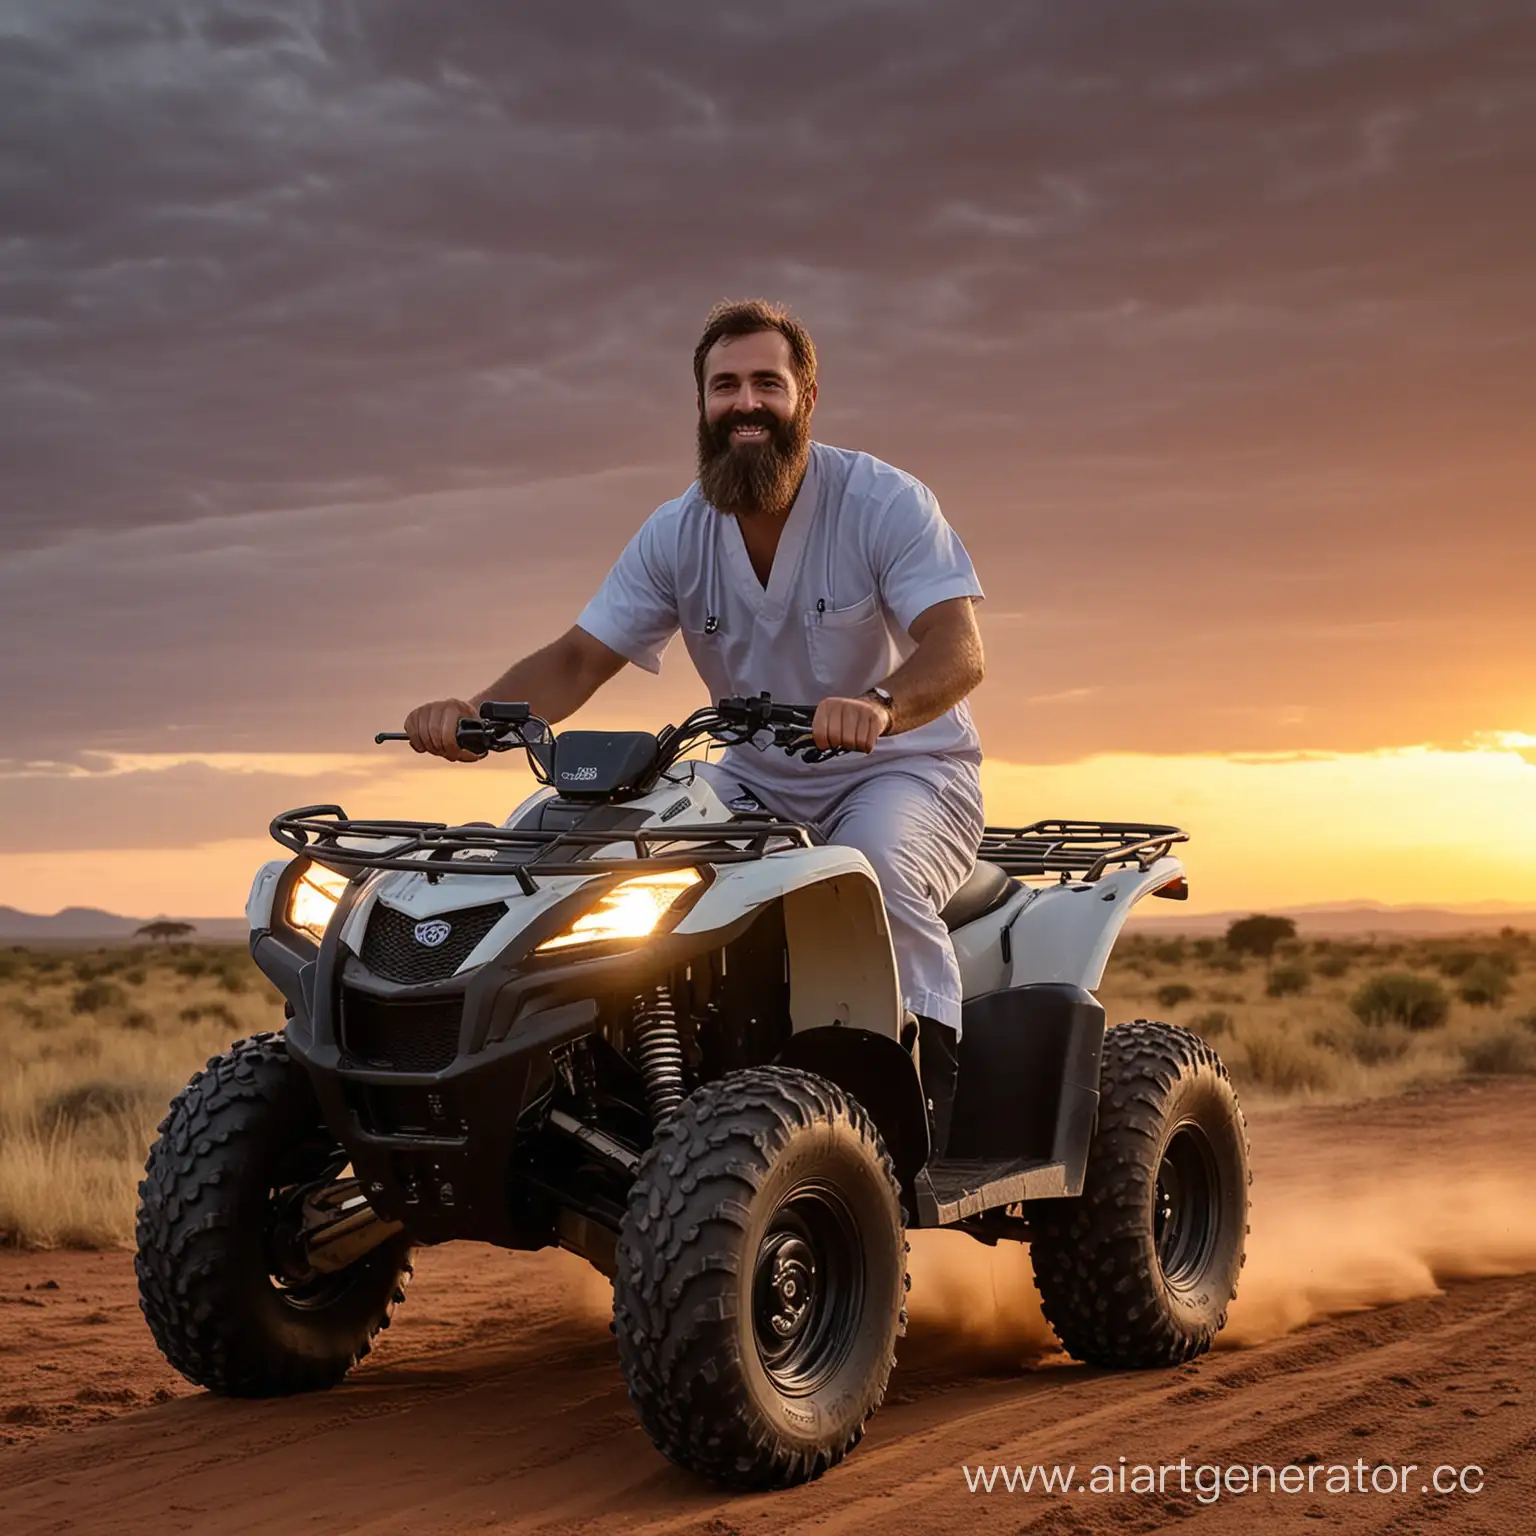 Bearded-Endocrinologist-Riding-Quad-Bike-into-Sunset-with-Applause